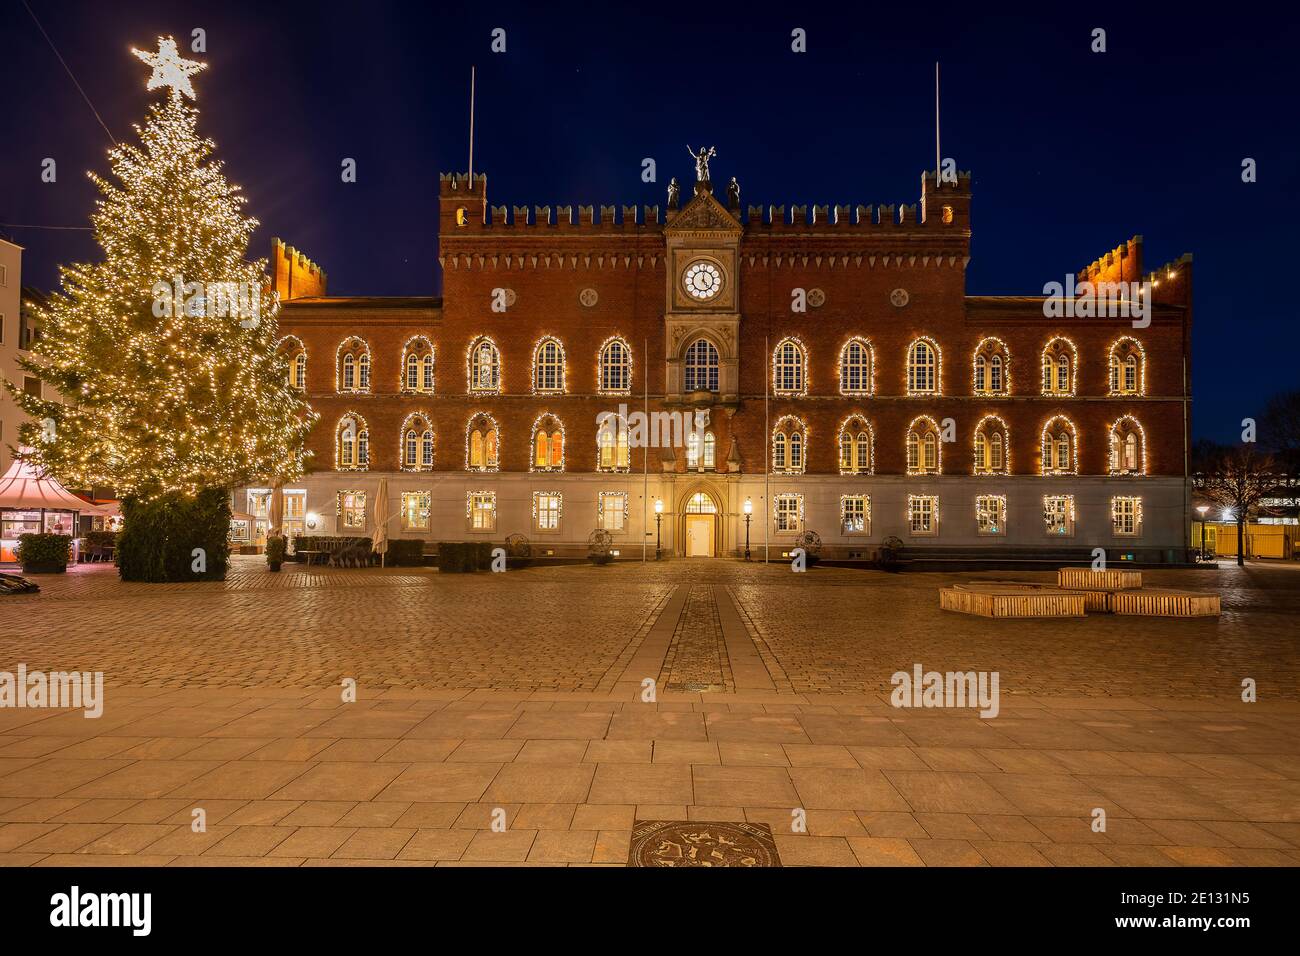 Odense City hall in Denmark at Christmas Stock Photo